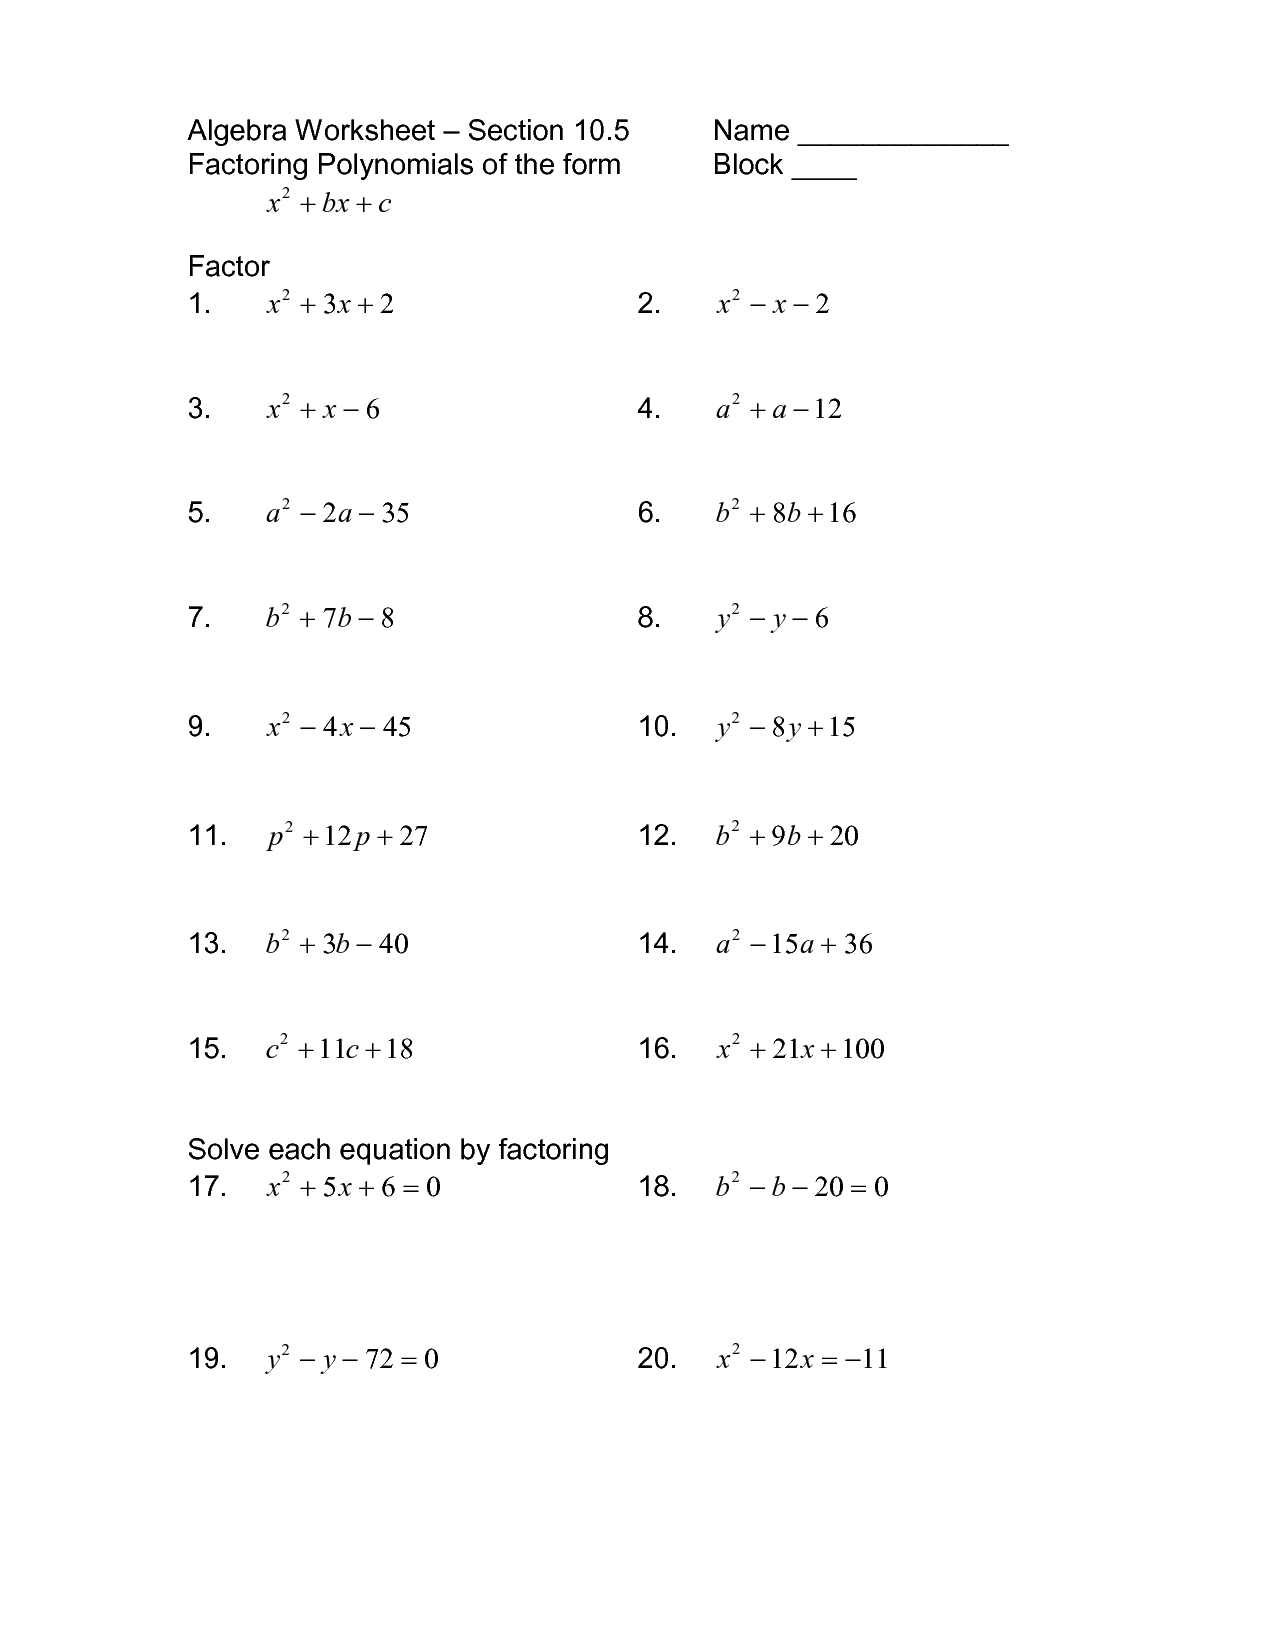 Factoring Polynomials Worksheet With Answers Algebra 1